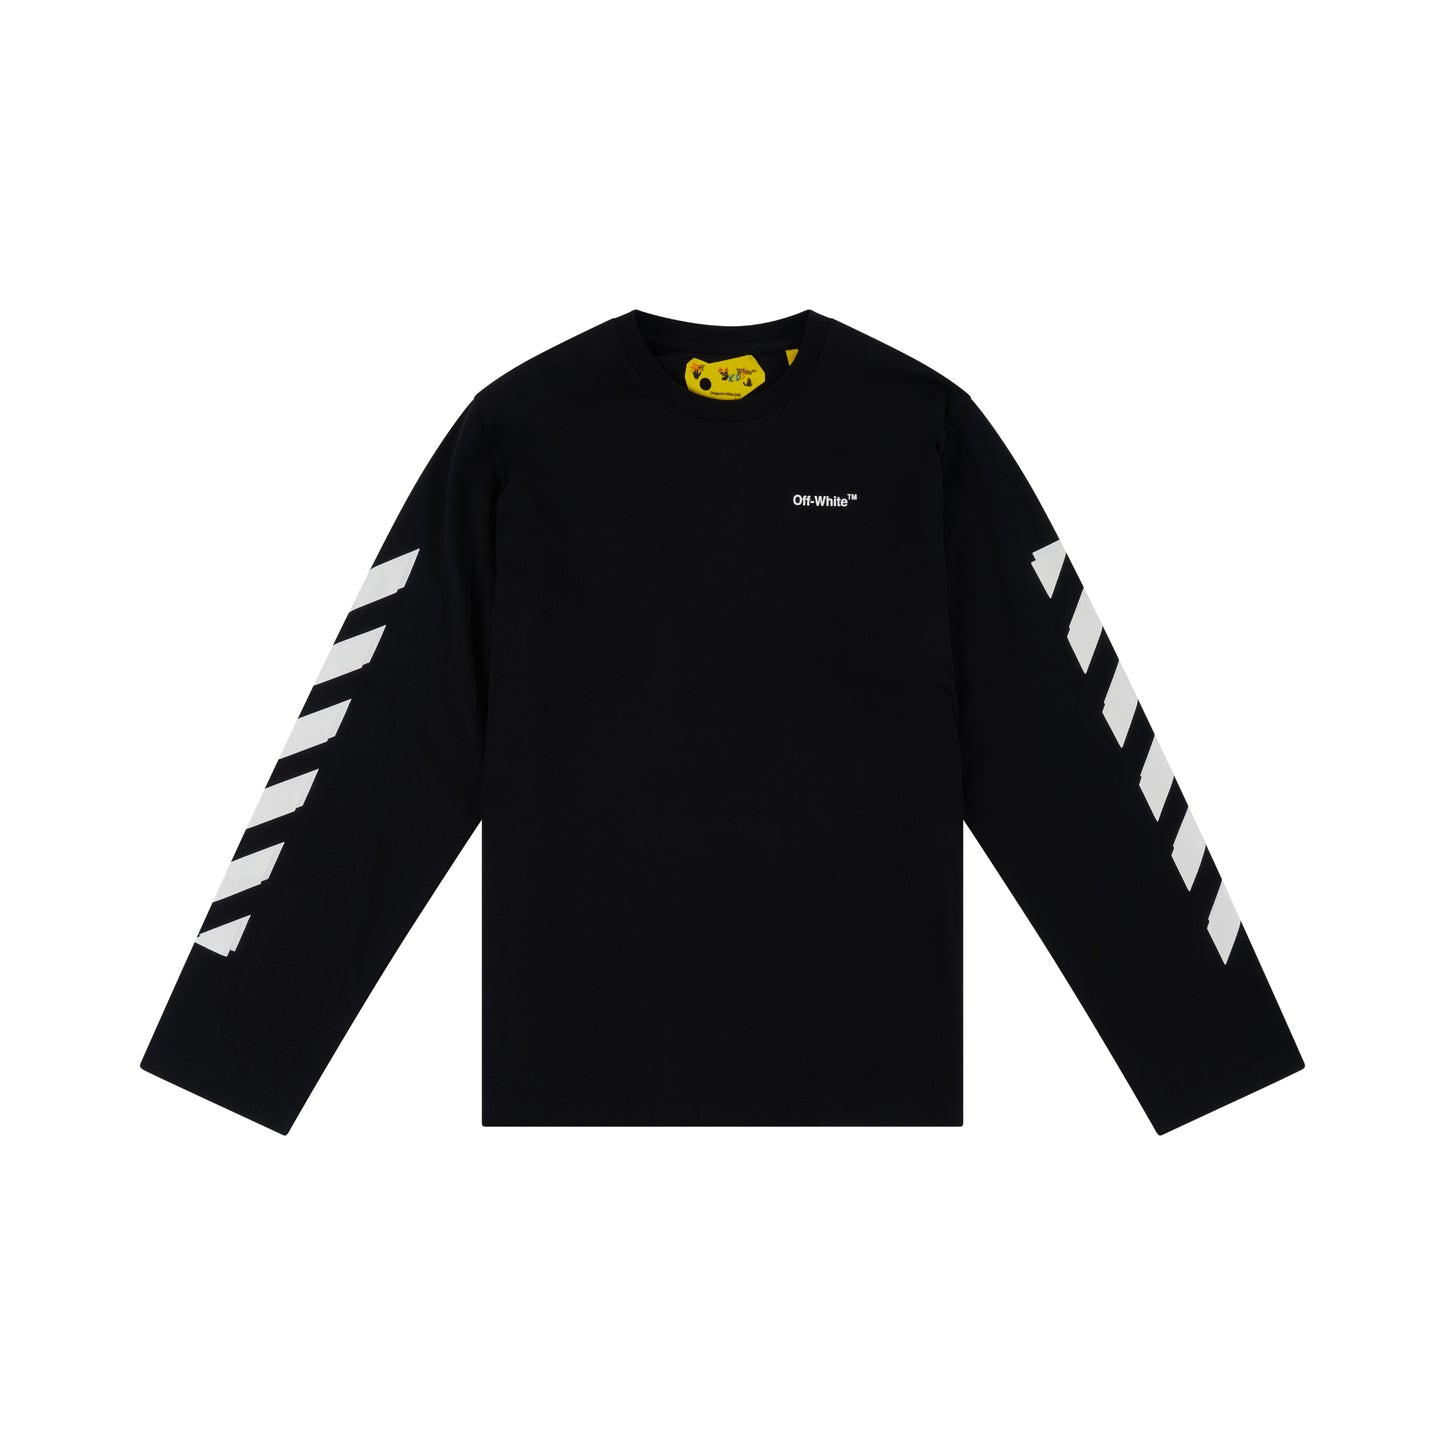 Rubber Arrow Long Sleeves T-Shirt in Black/White